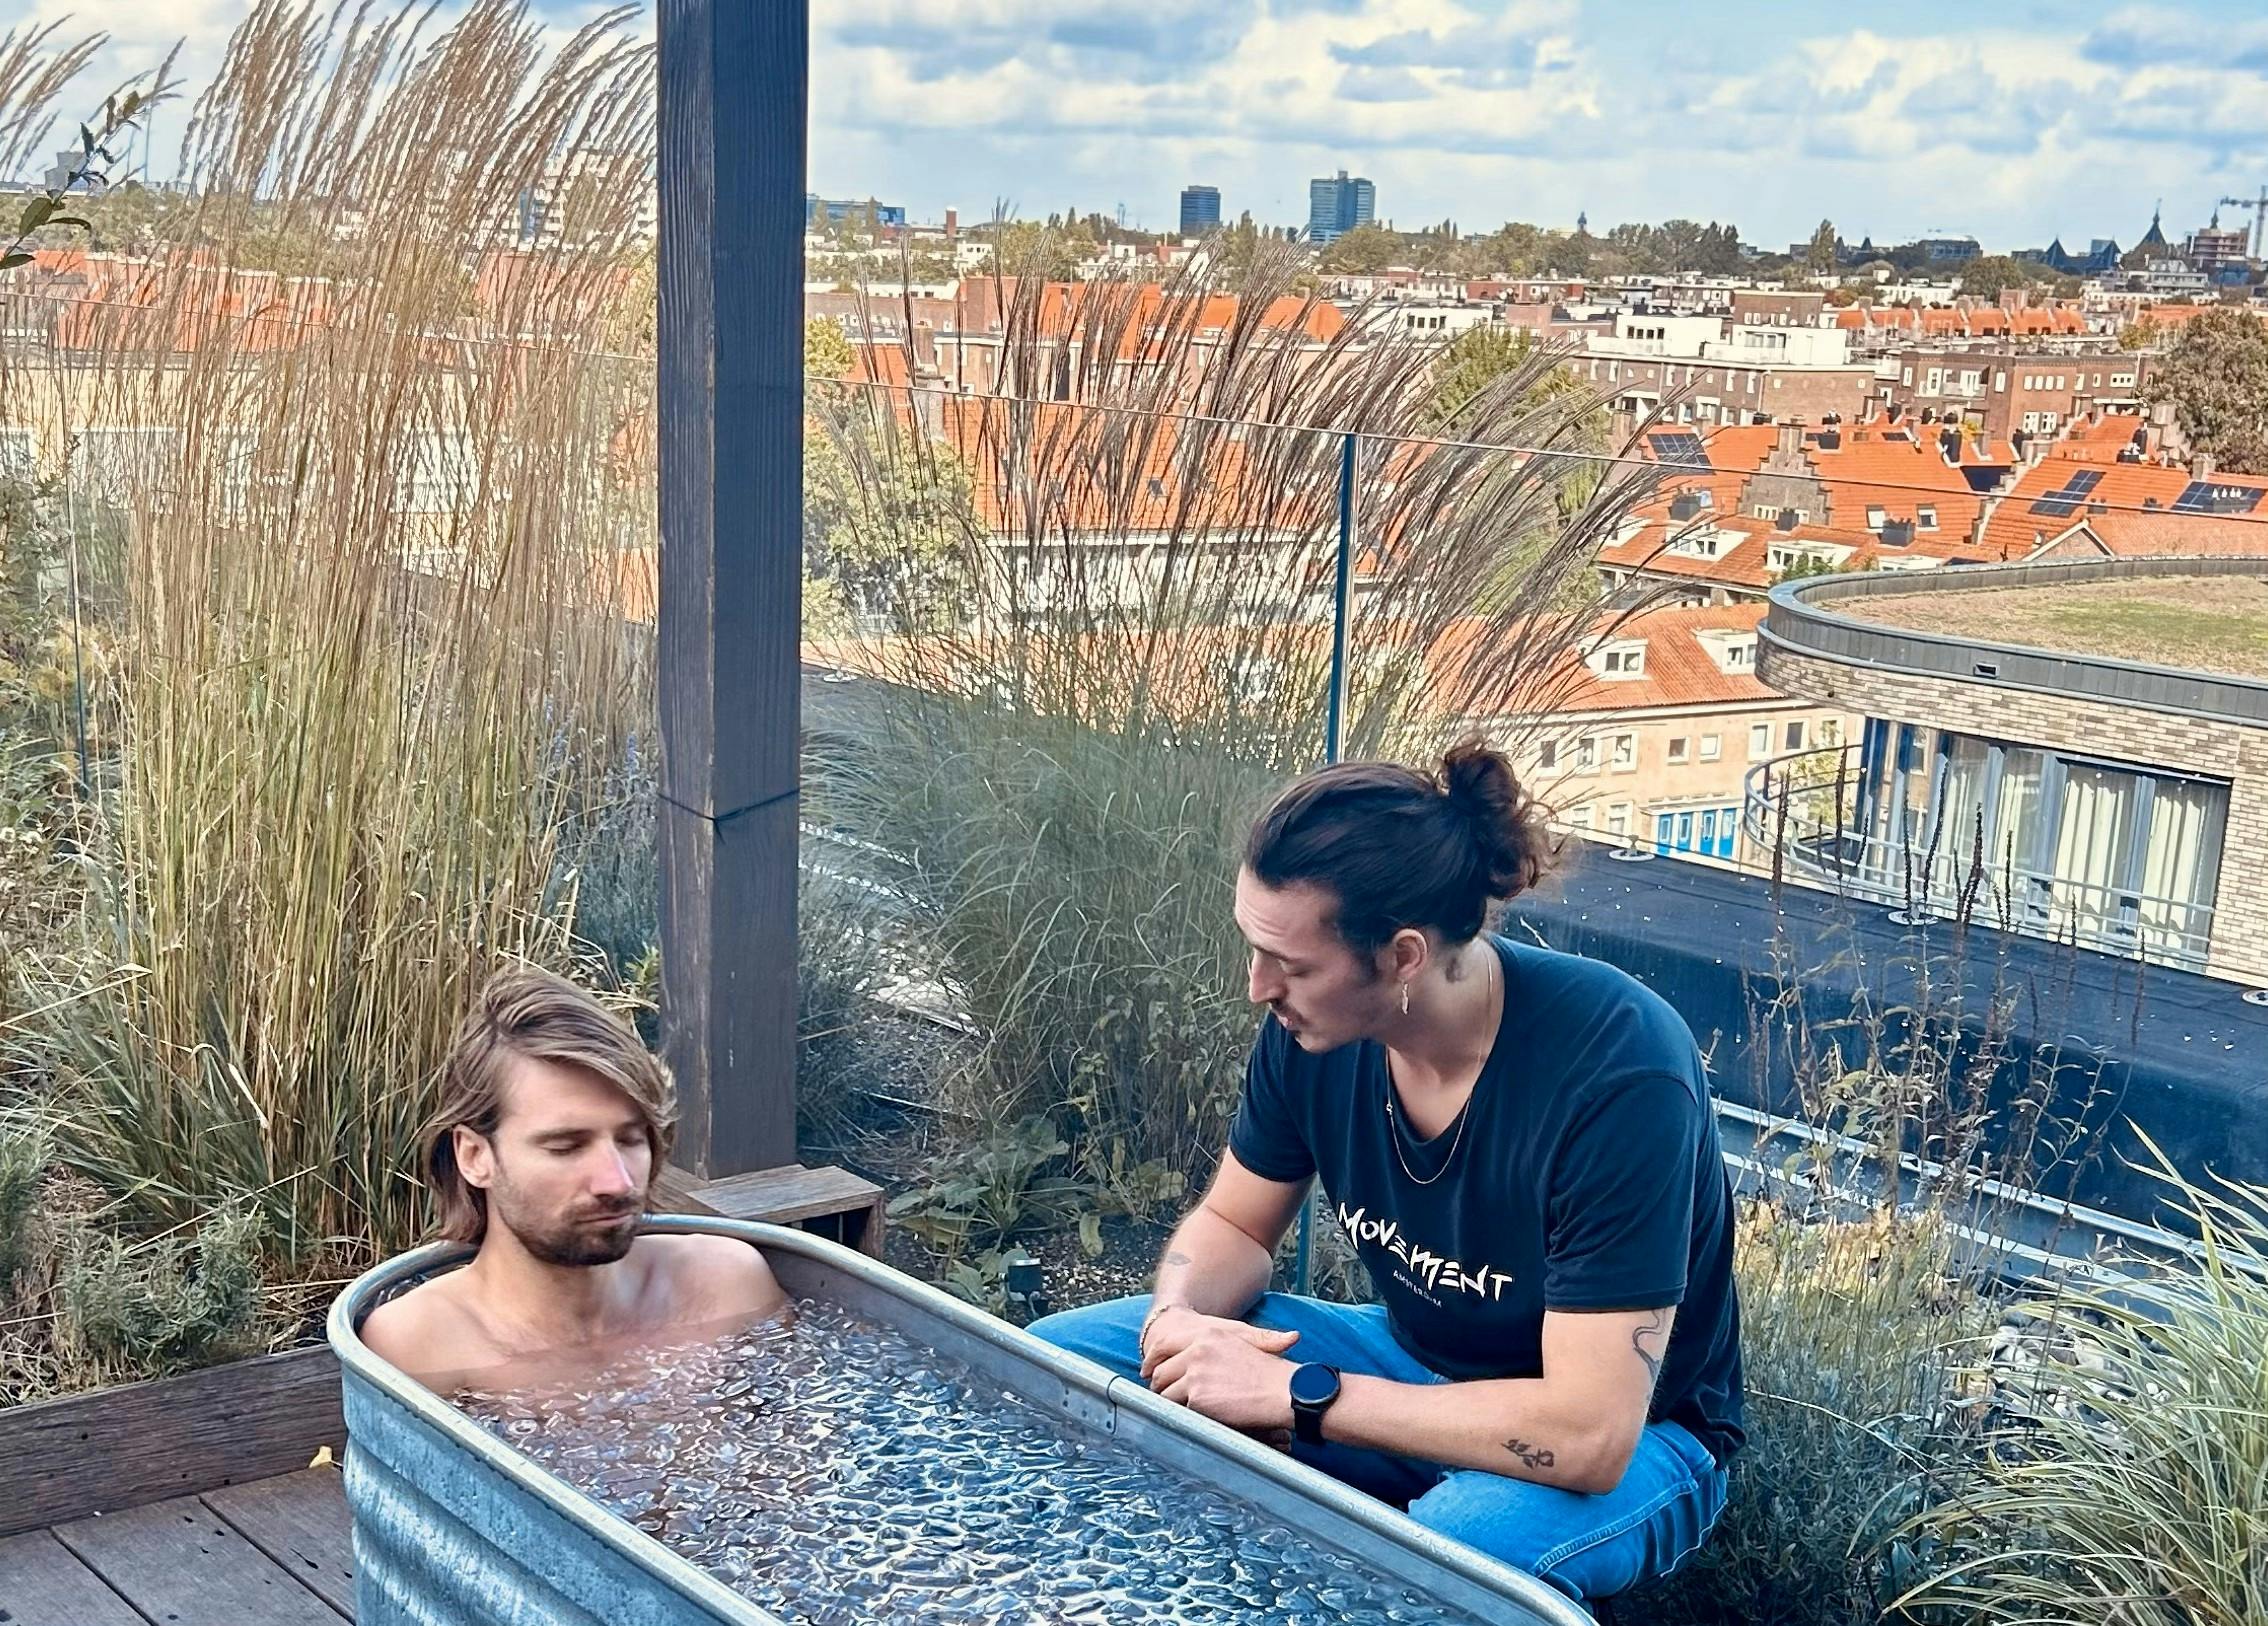 Rise and shine with an ice bath on Hotel Casa's rooftop terrace